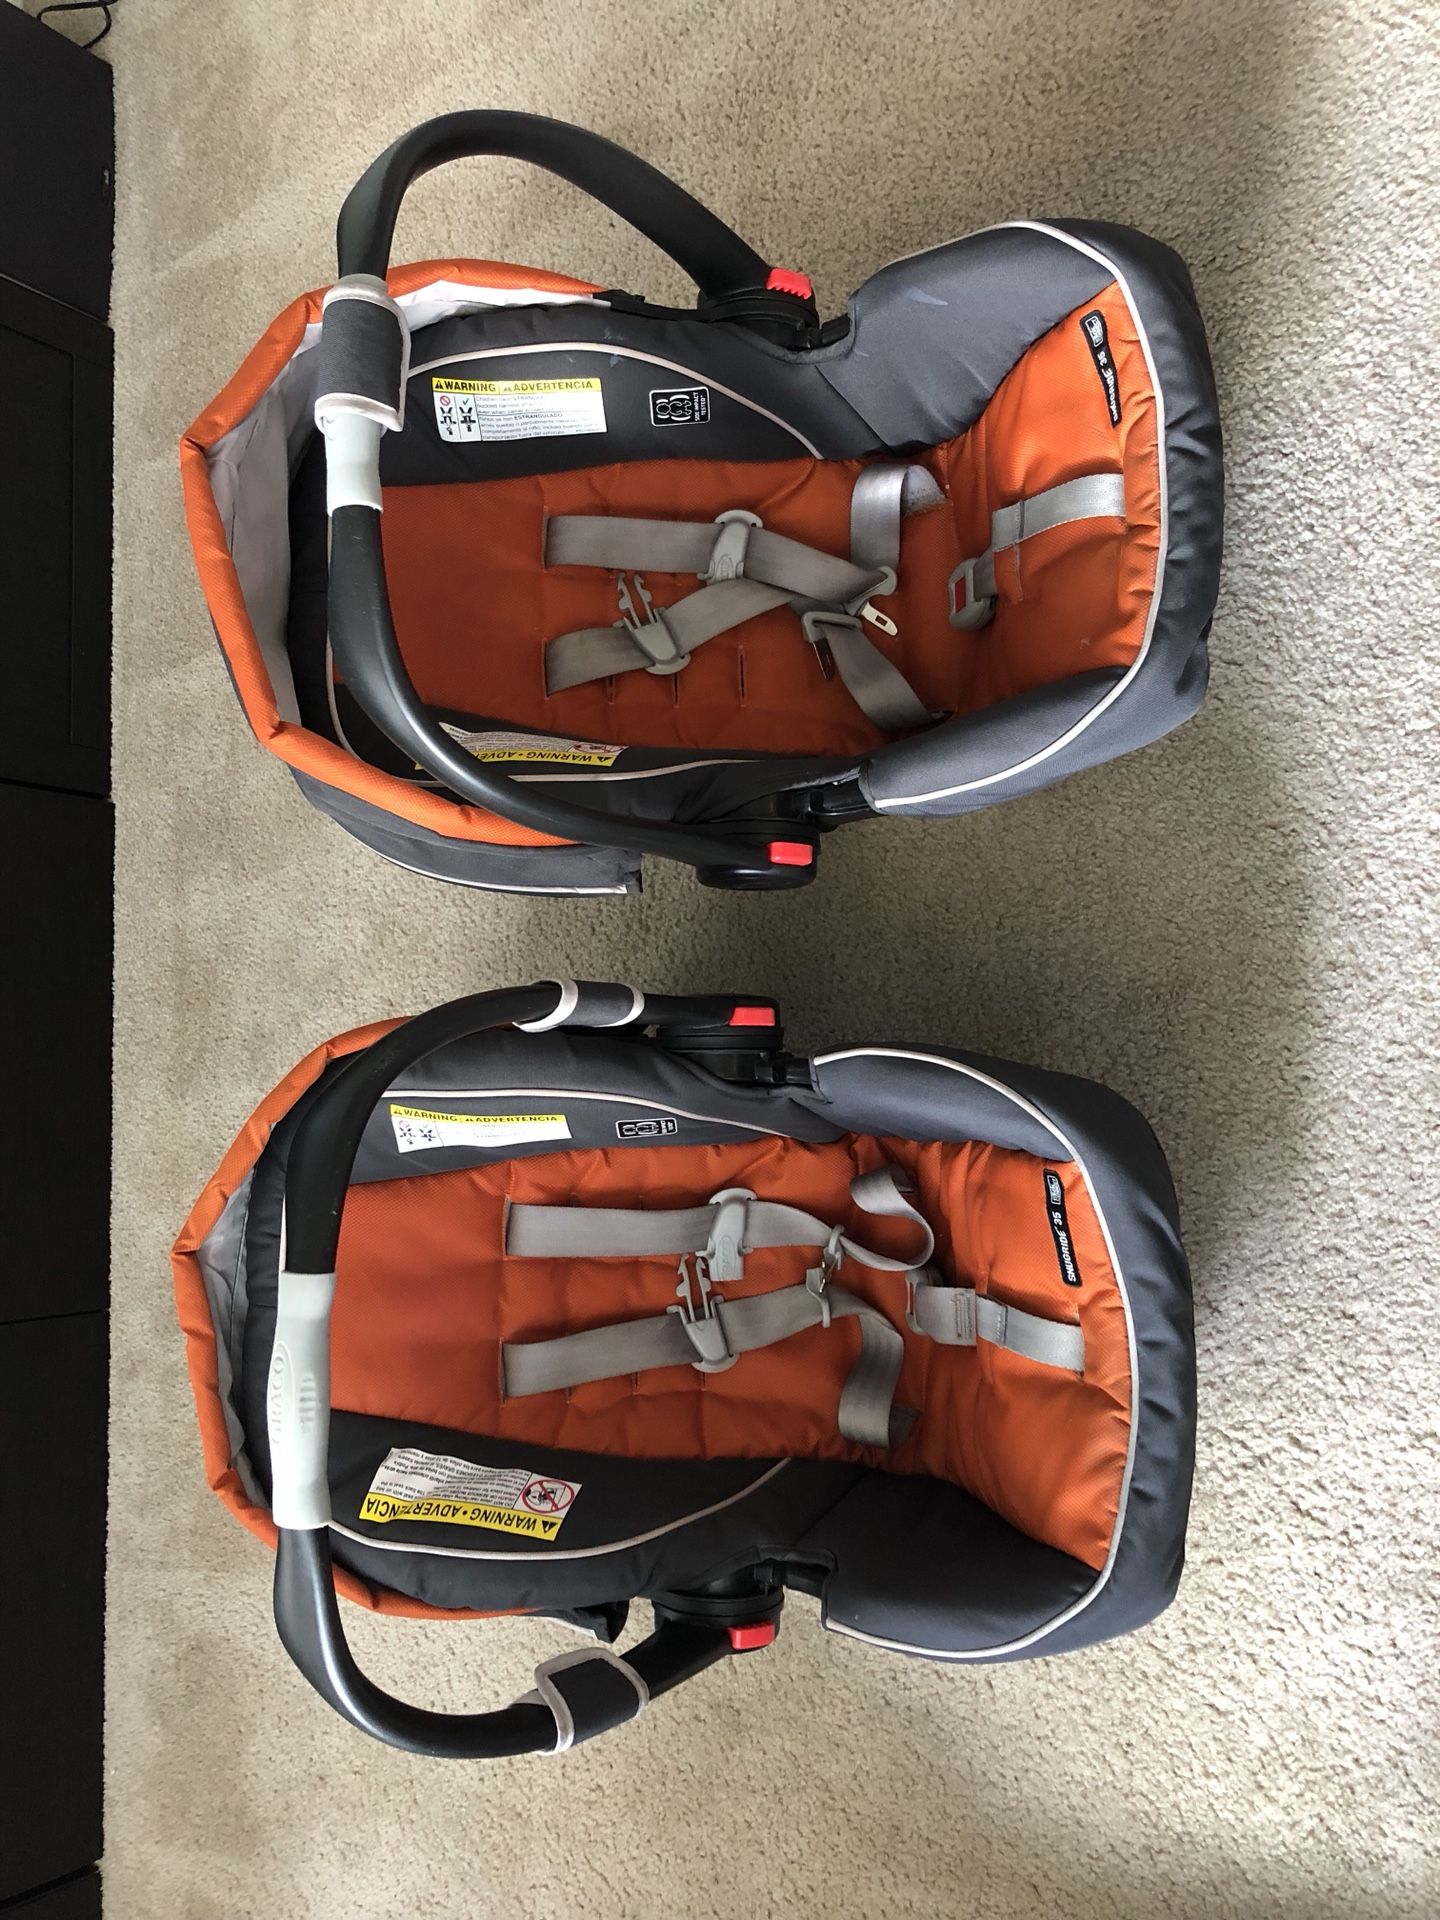 One Graco Snugride 35 Clickconnect car seat- one seat and bases sold